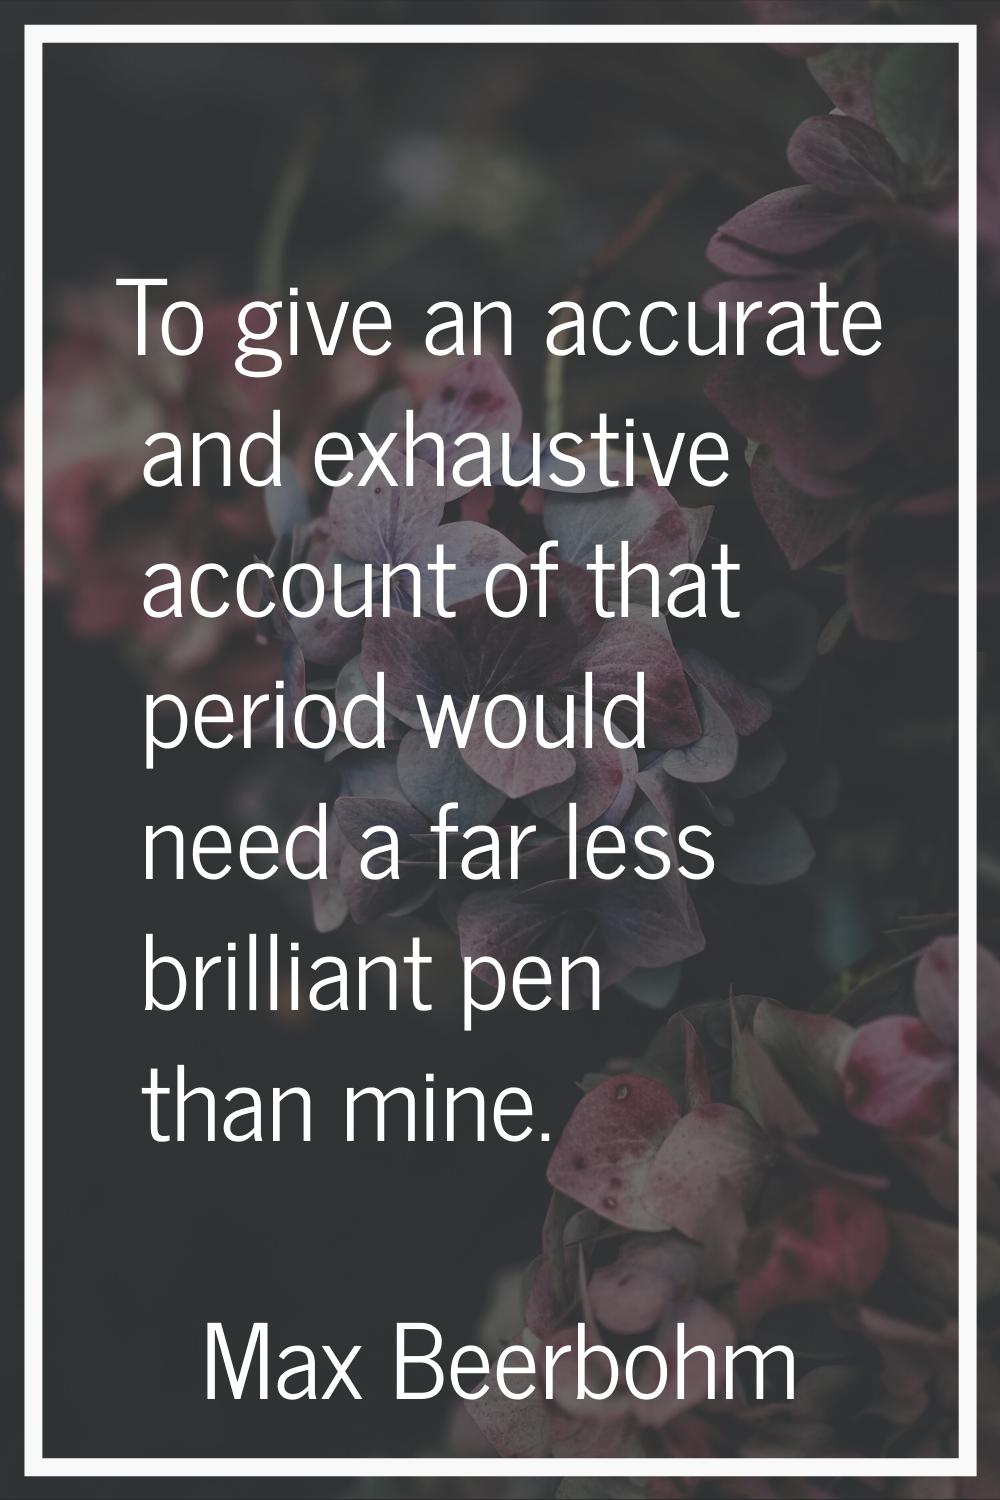 To give an accurate and exhaustive account of that period would need a far less brilliant pen than 